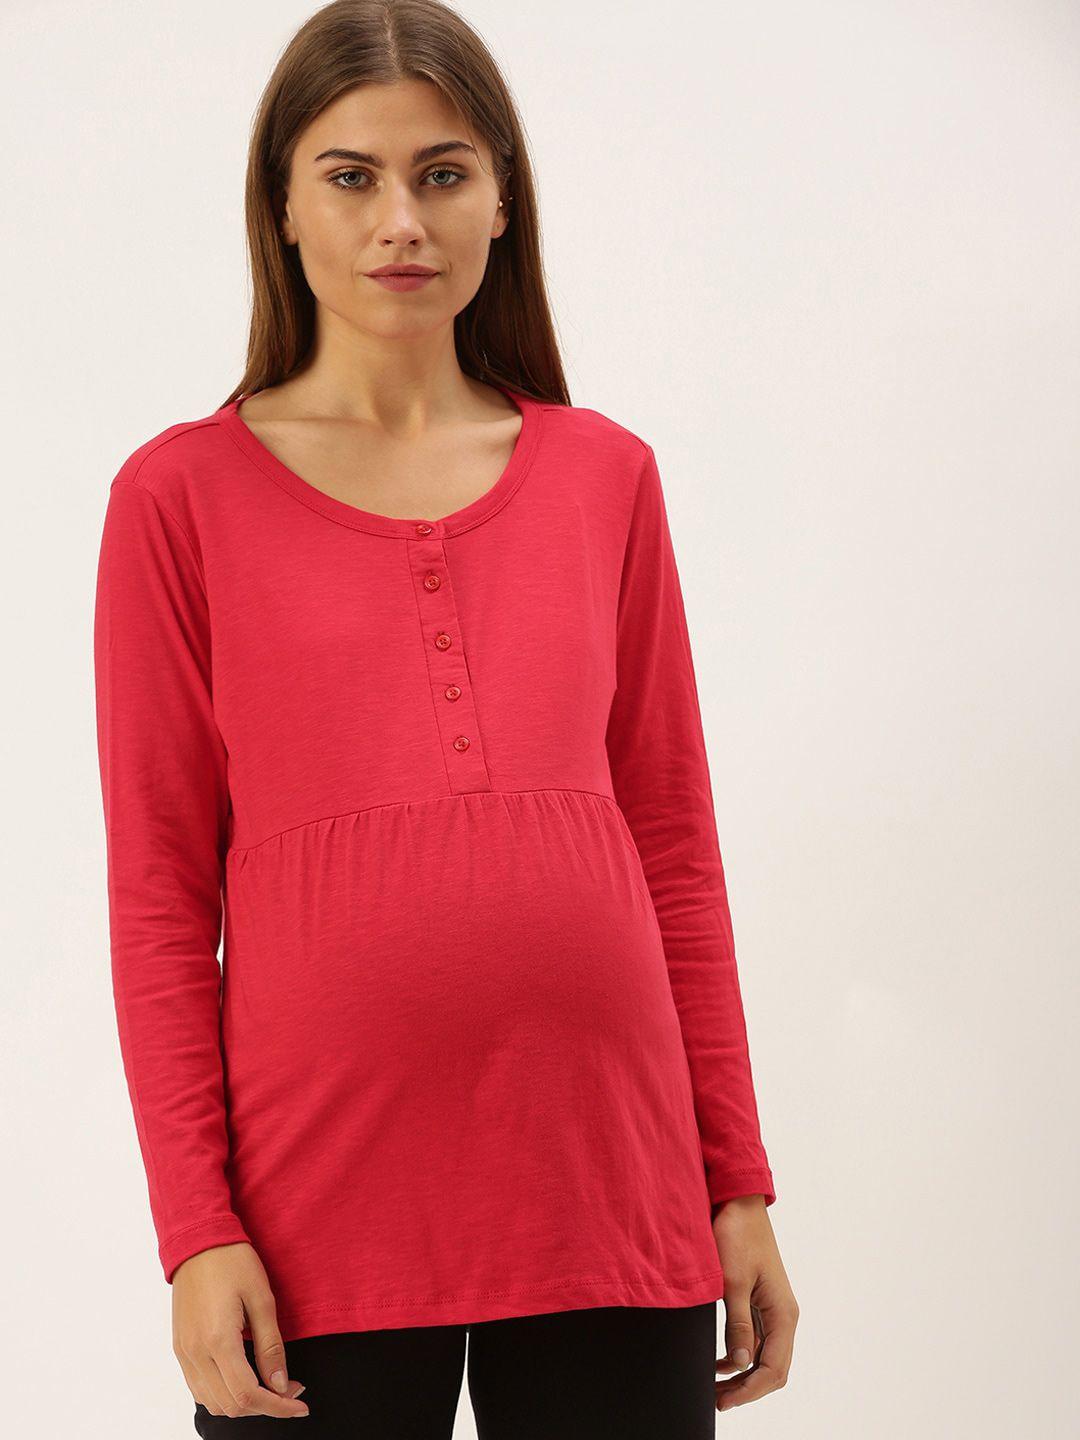 nejo-round-neck-long-sleeves-maternity-pure-cotton-top